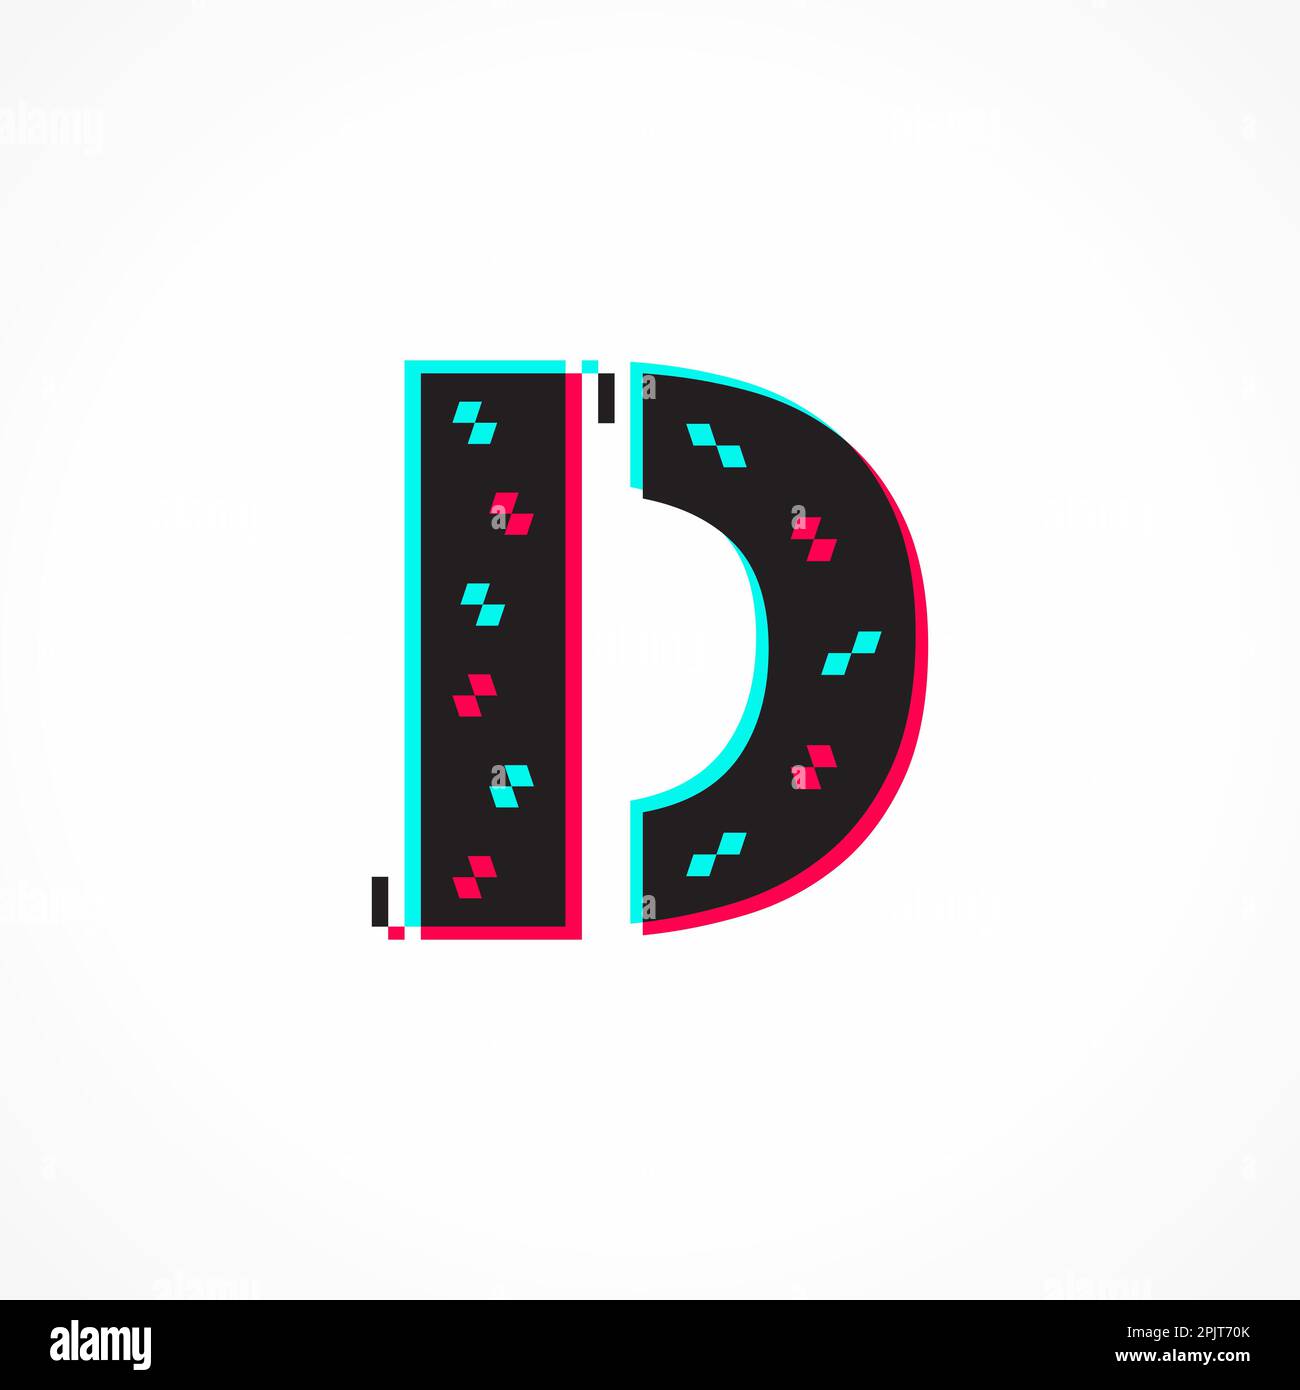 Abstract Glitch Effect Corporate Identity Letter D Logo Design Stock Vector